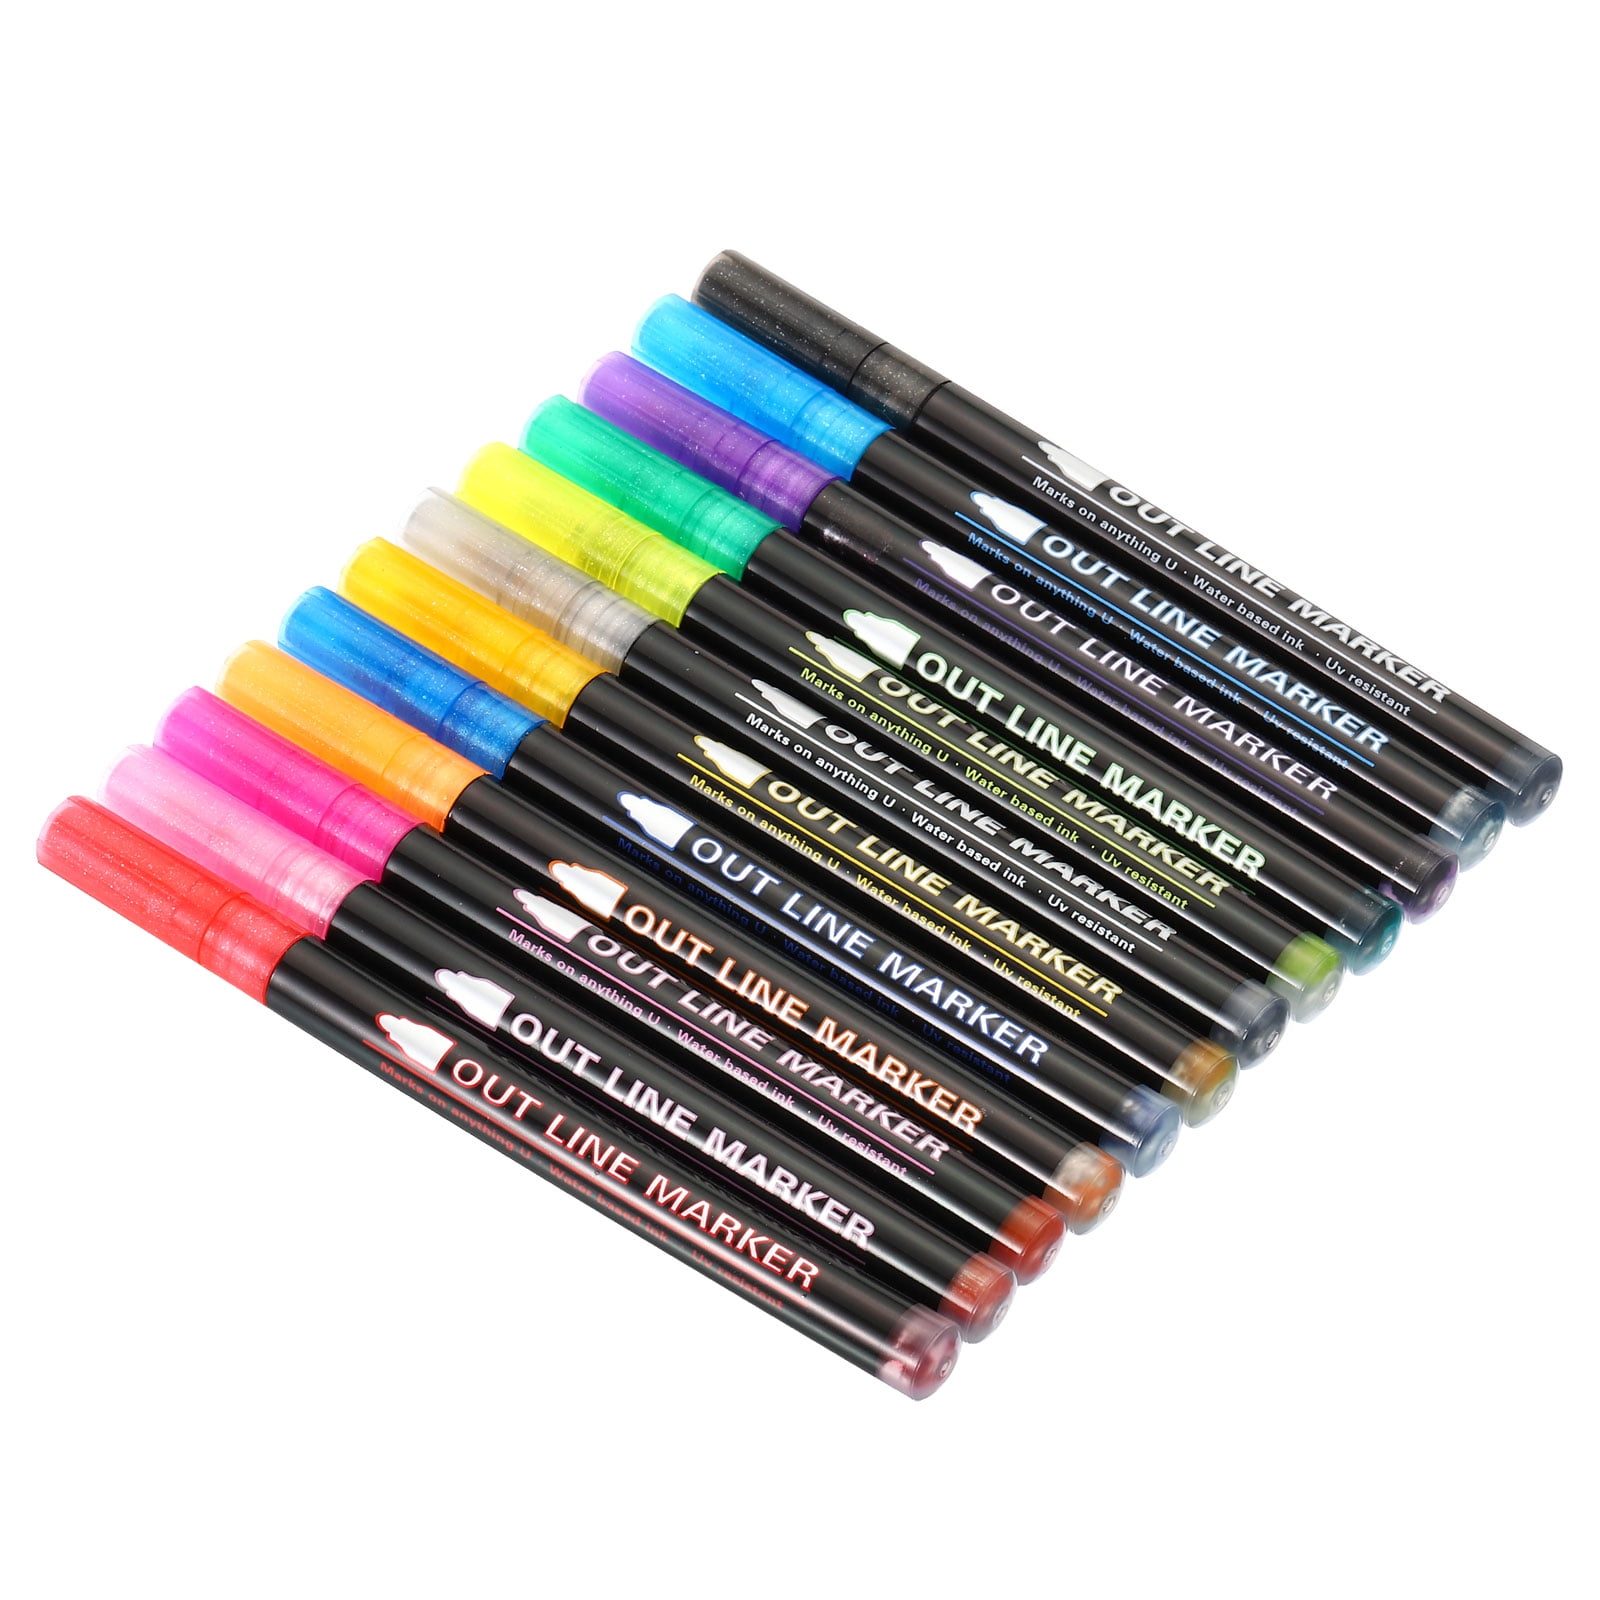 Highlighter Bible Marking Kit, 6 Pieces, Mardel, 3780046